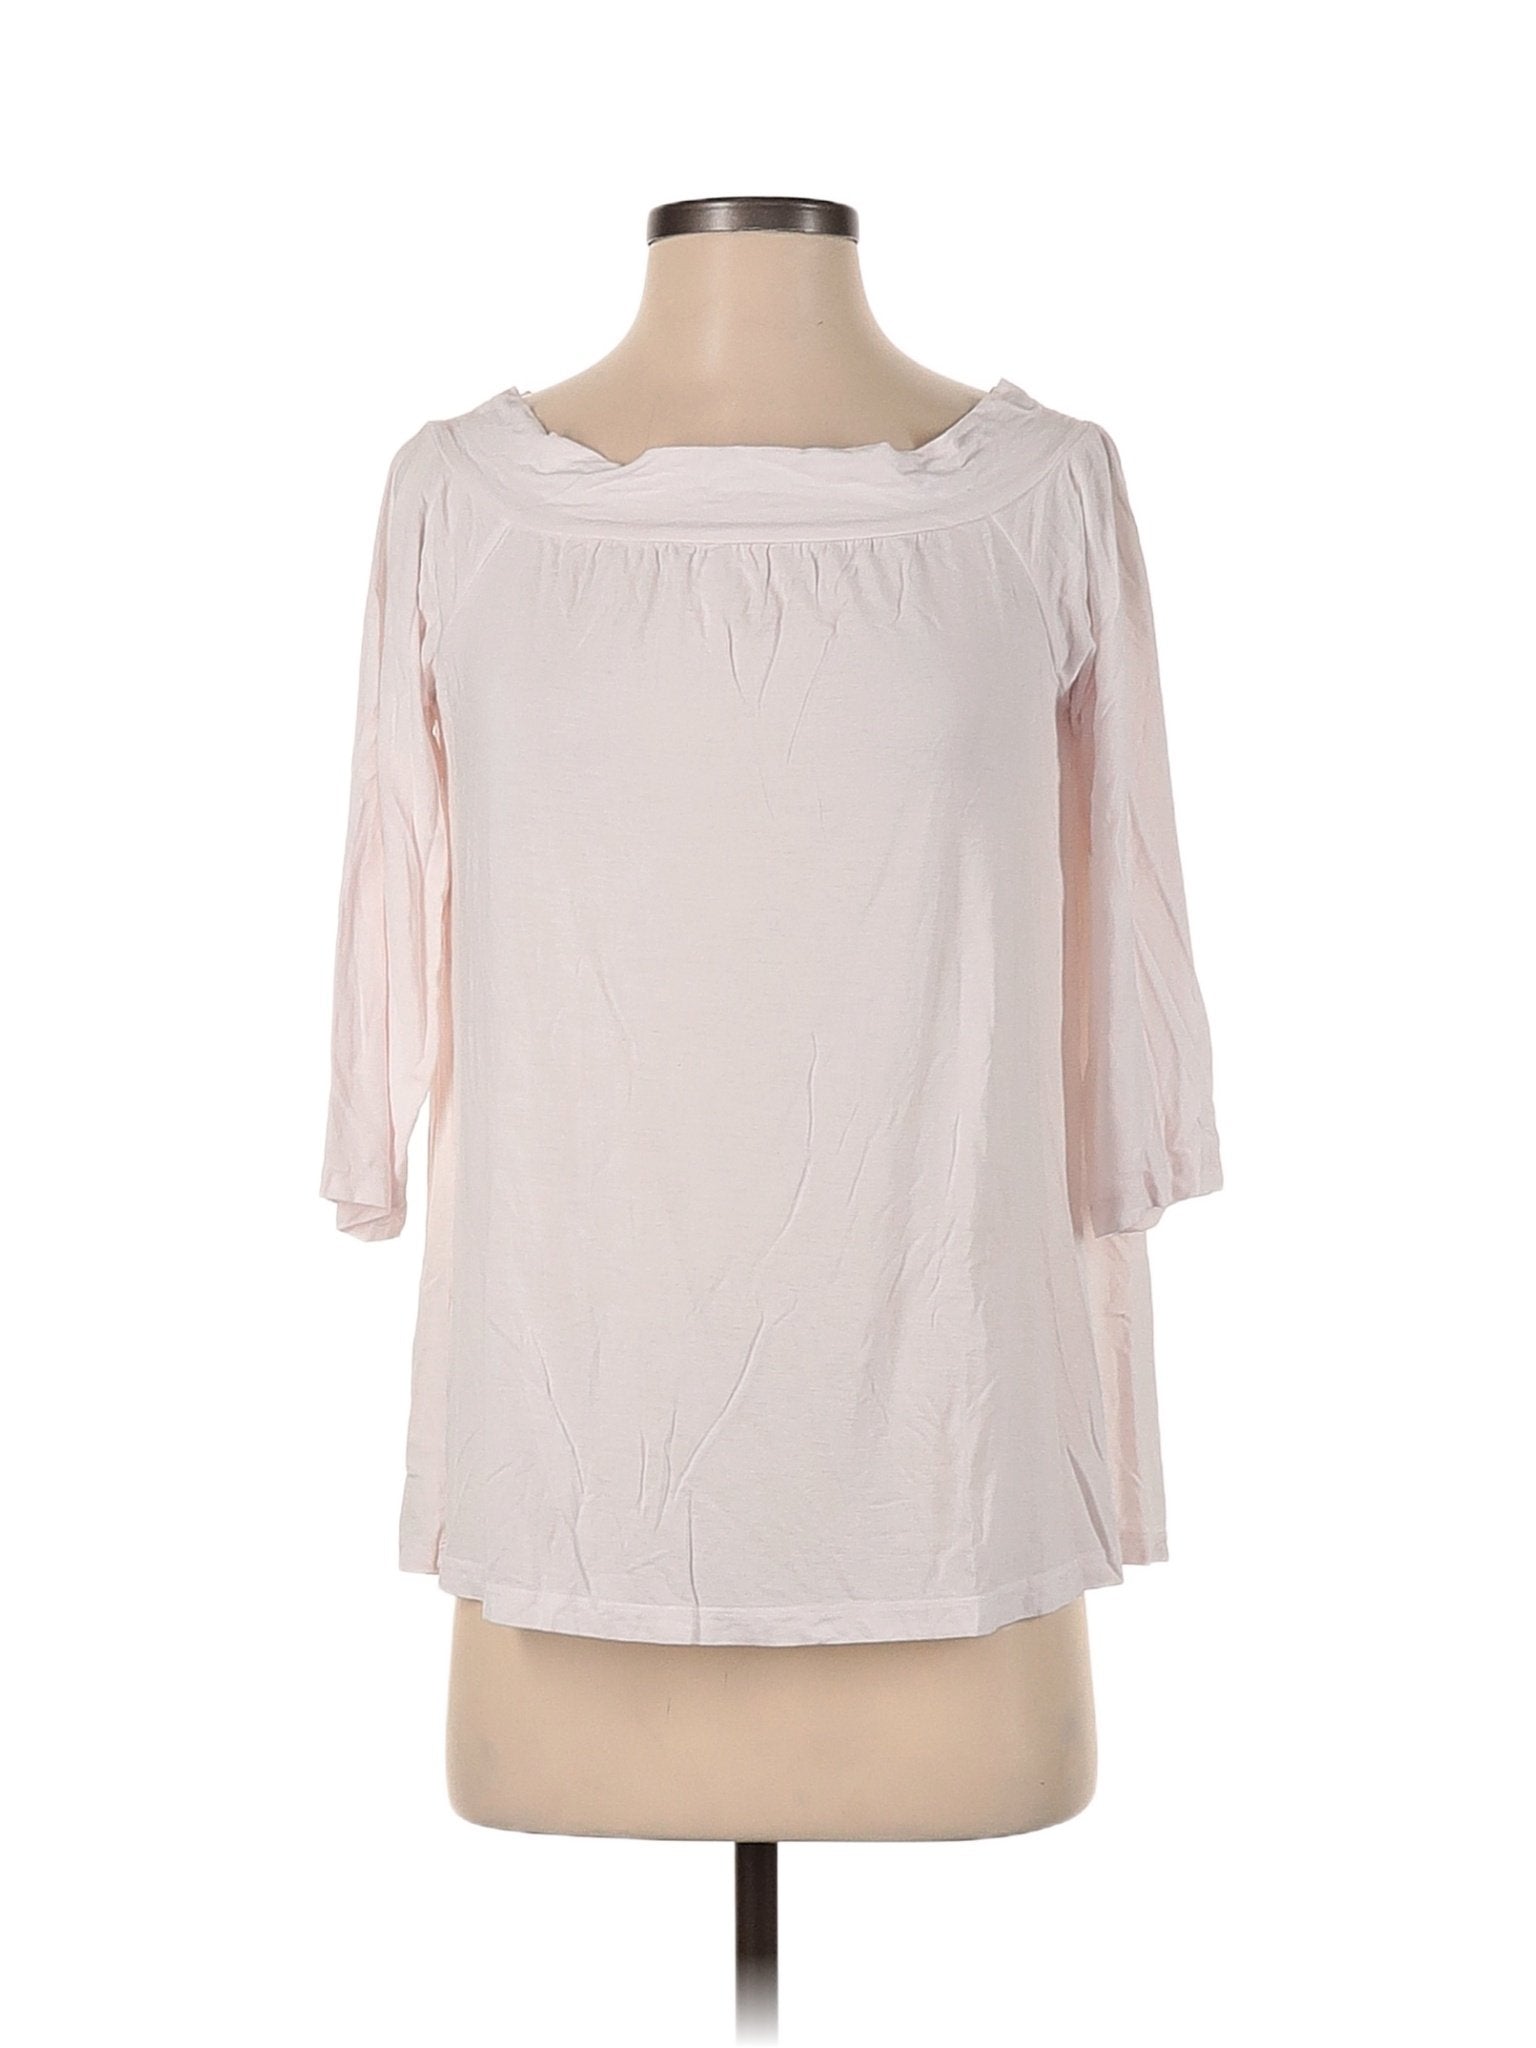 Short Sleeve Top size - 0S